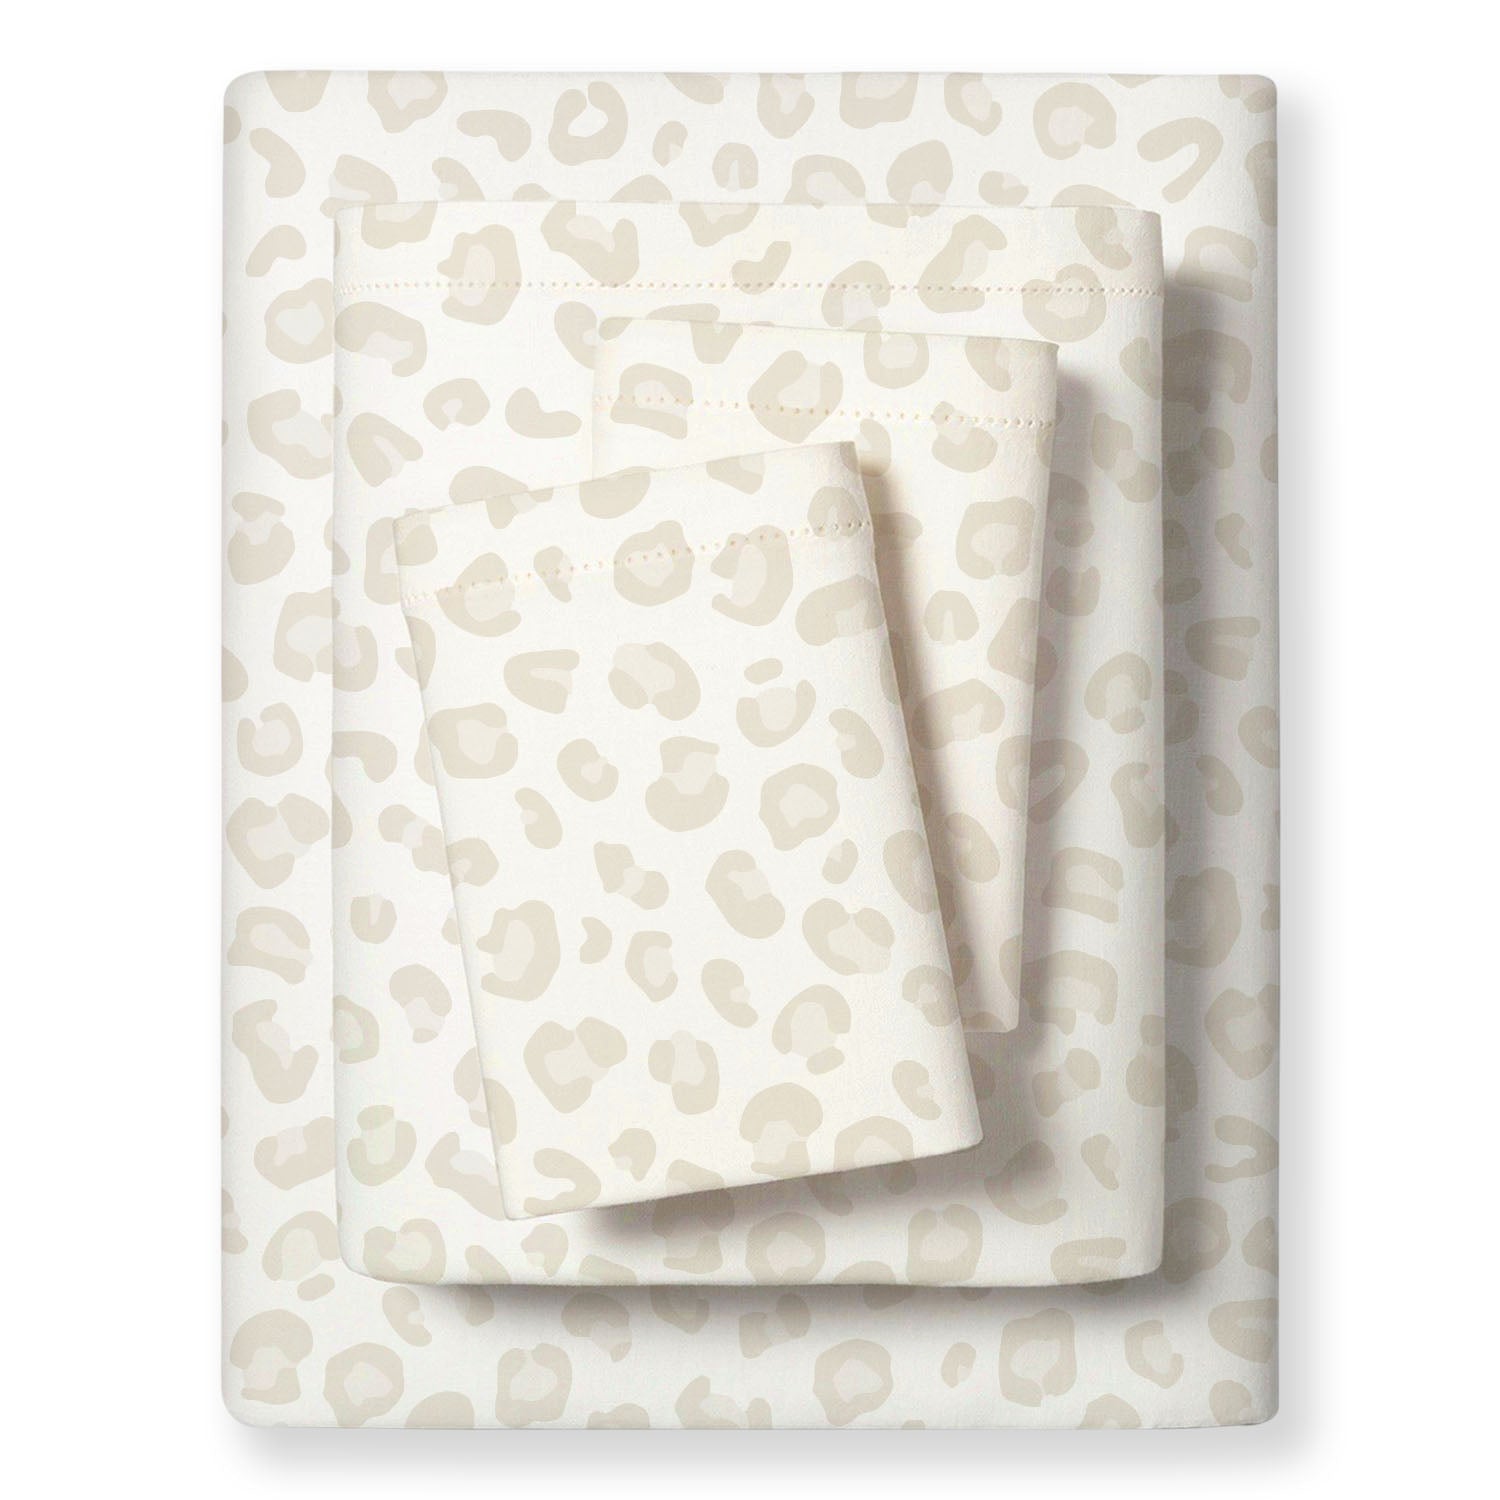 A neatly folded set of Organic Cotton Sheet Set in Wild Cream from Makemake Organics, with a subtle, abstract print, displayed on a plain white background.